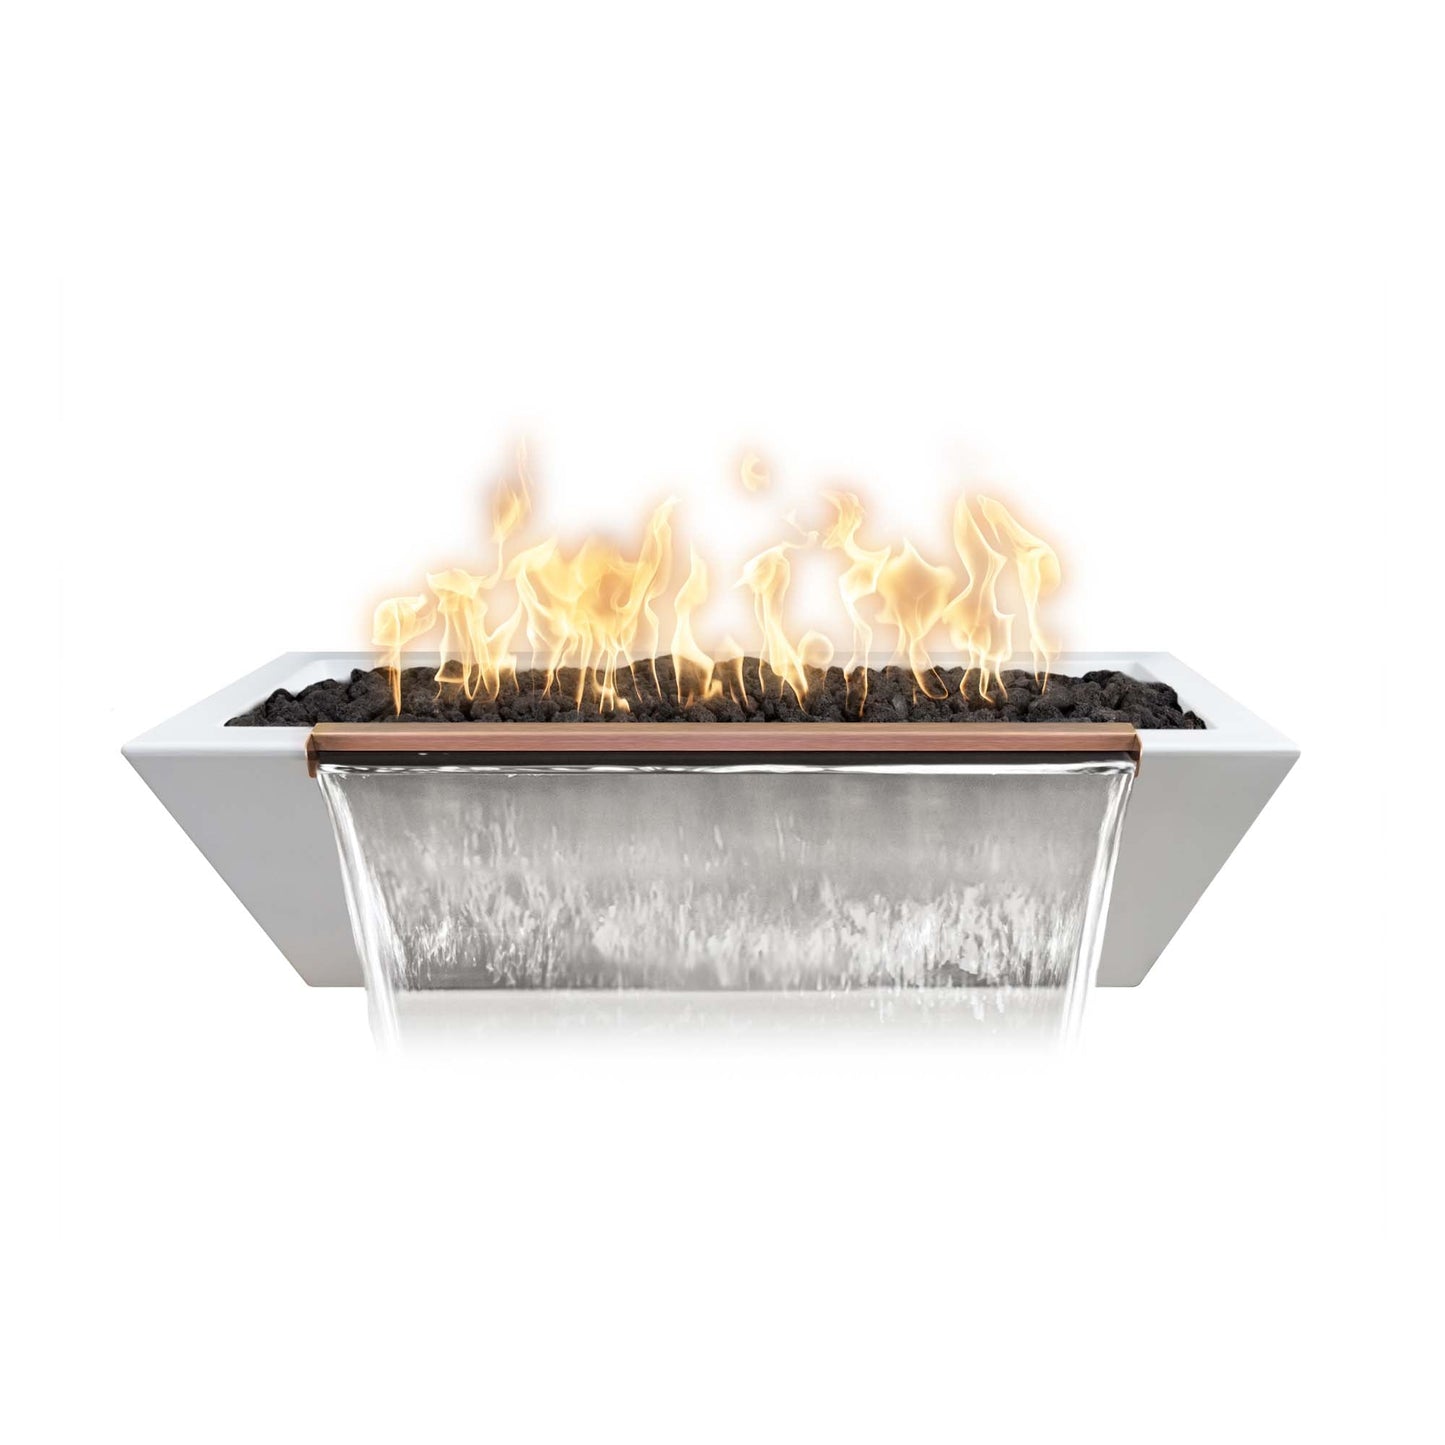 The Outdoor Plus Linear Maya 72" Metallic Copper GFRC Concrete Liquid Propane Fire & Water Bowl with Match Lit Ignition